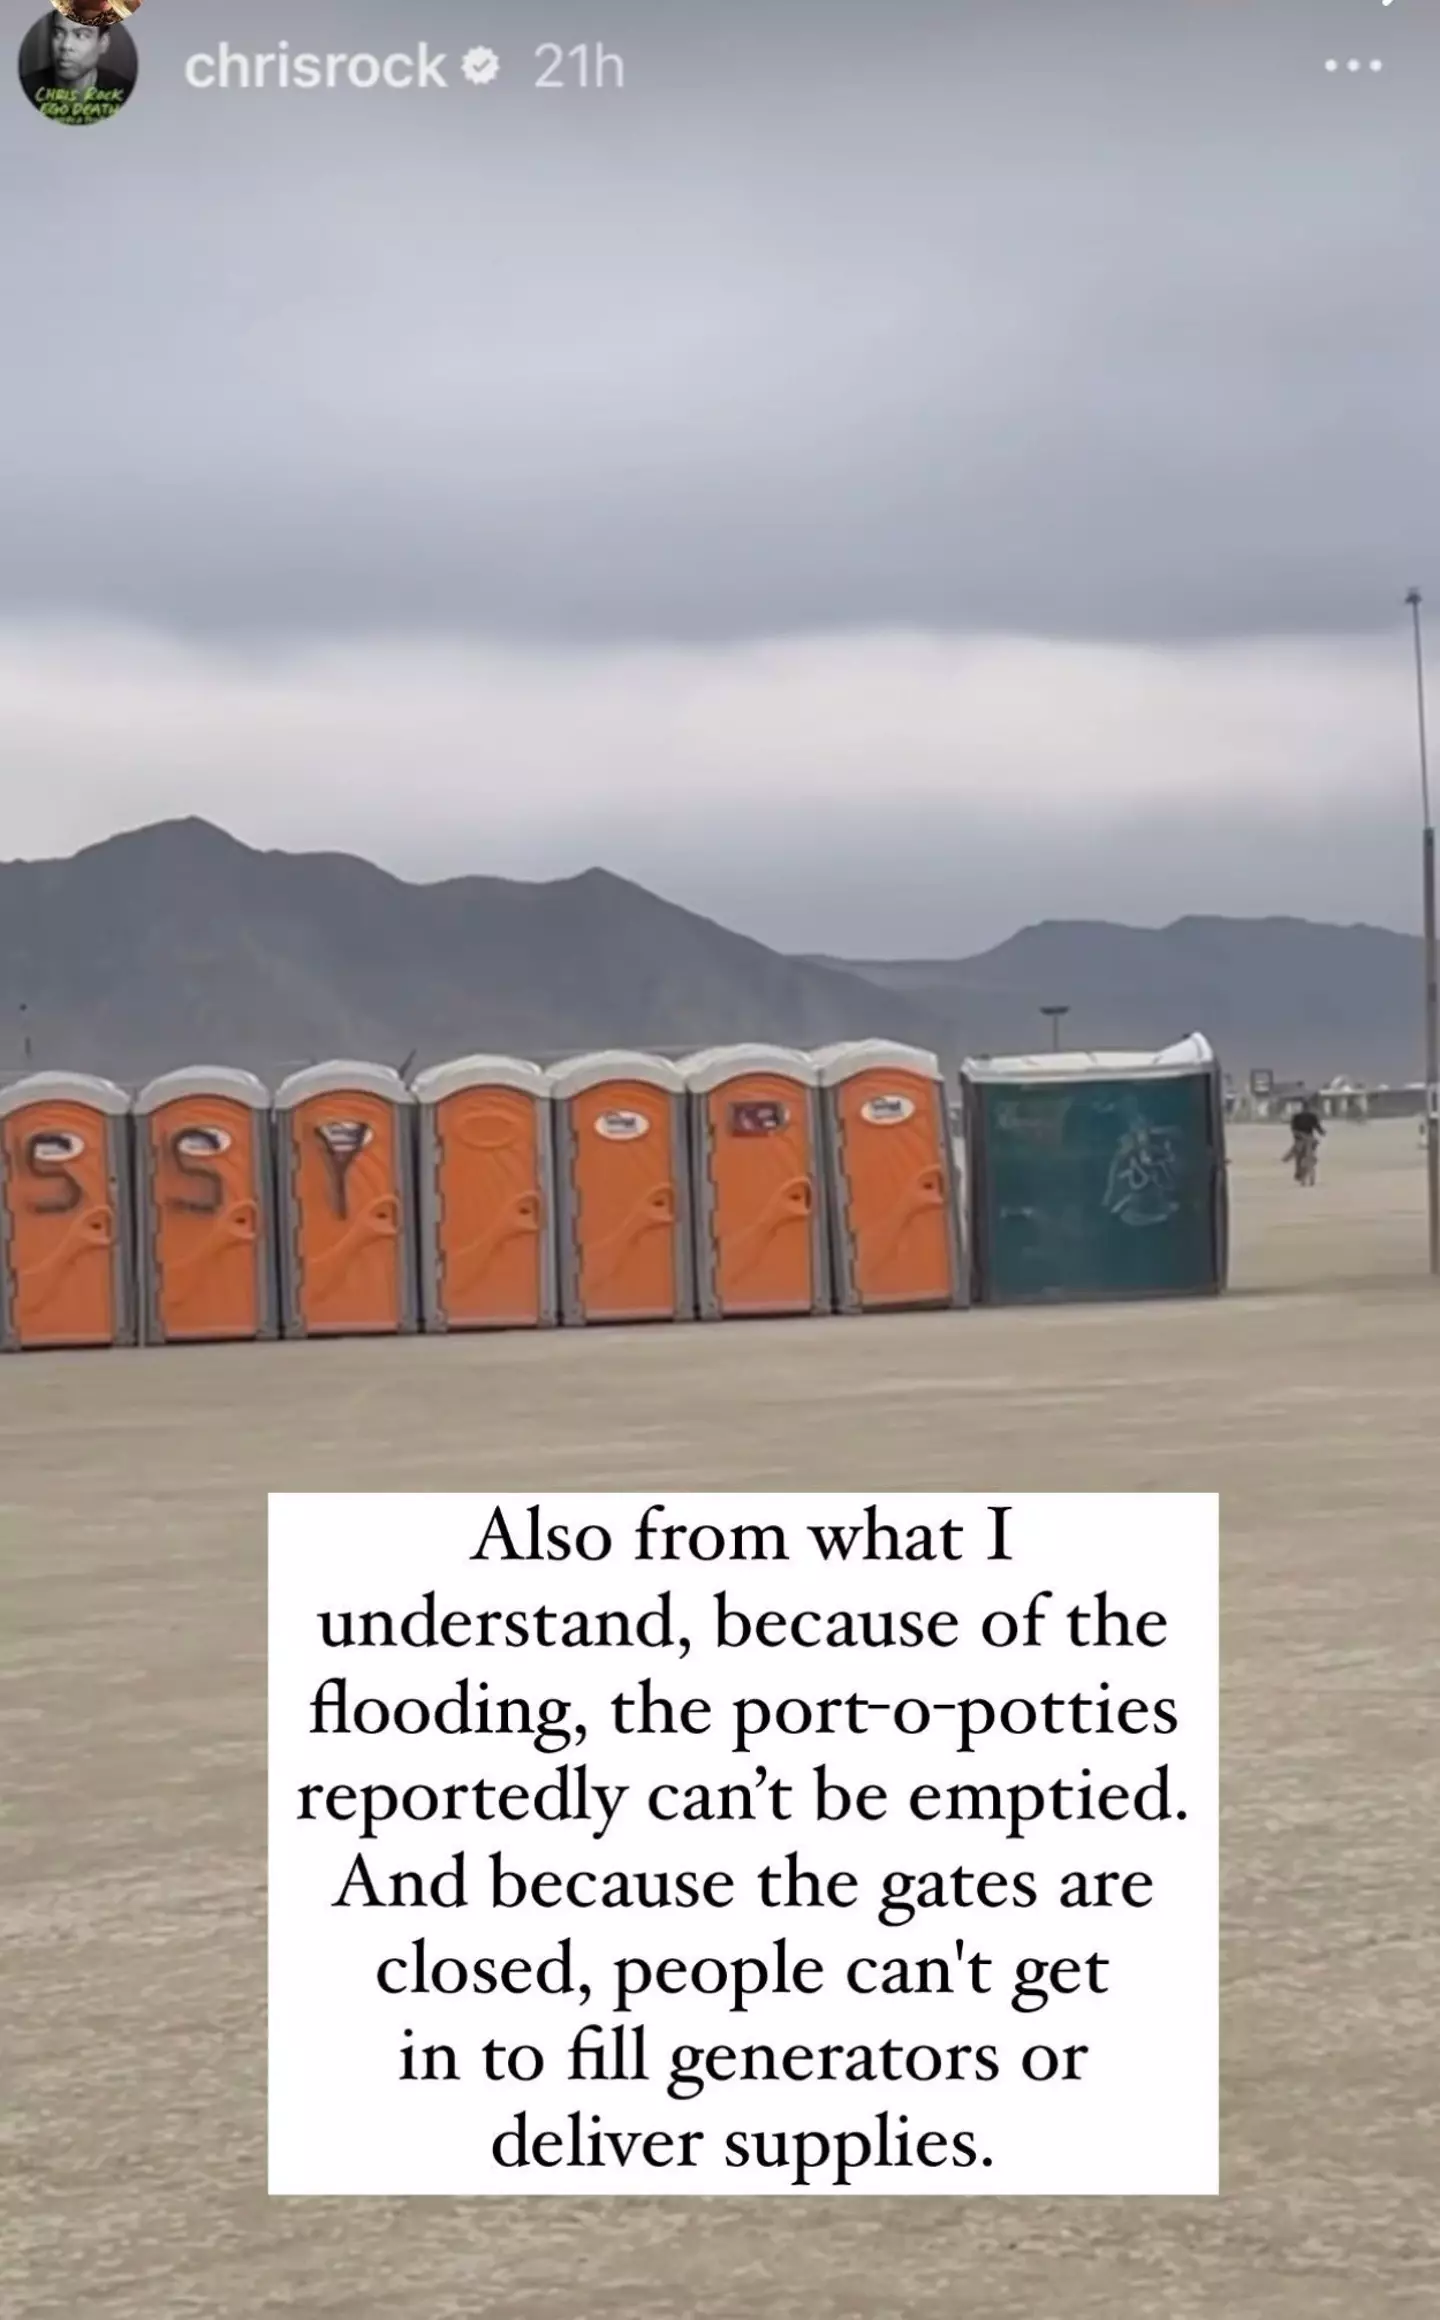 Chris Rock said the toilets at Burning Man can't be emptied.